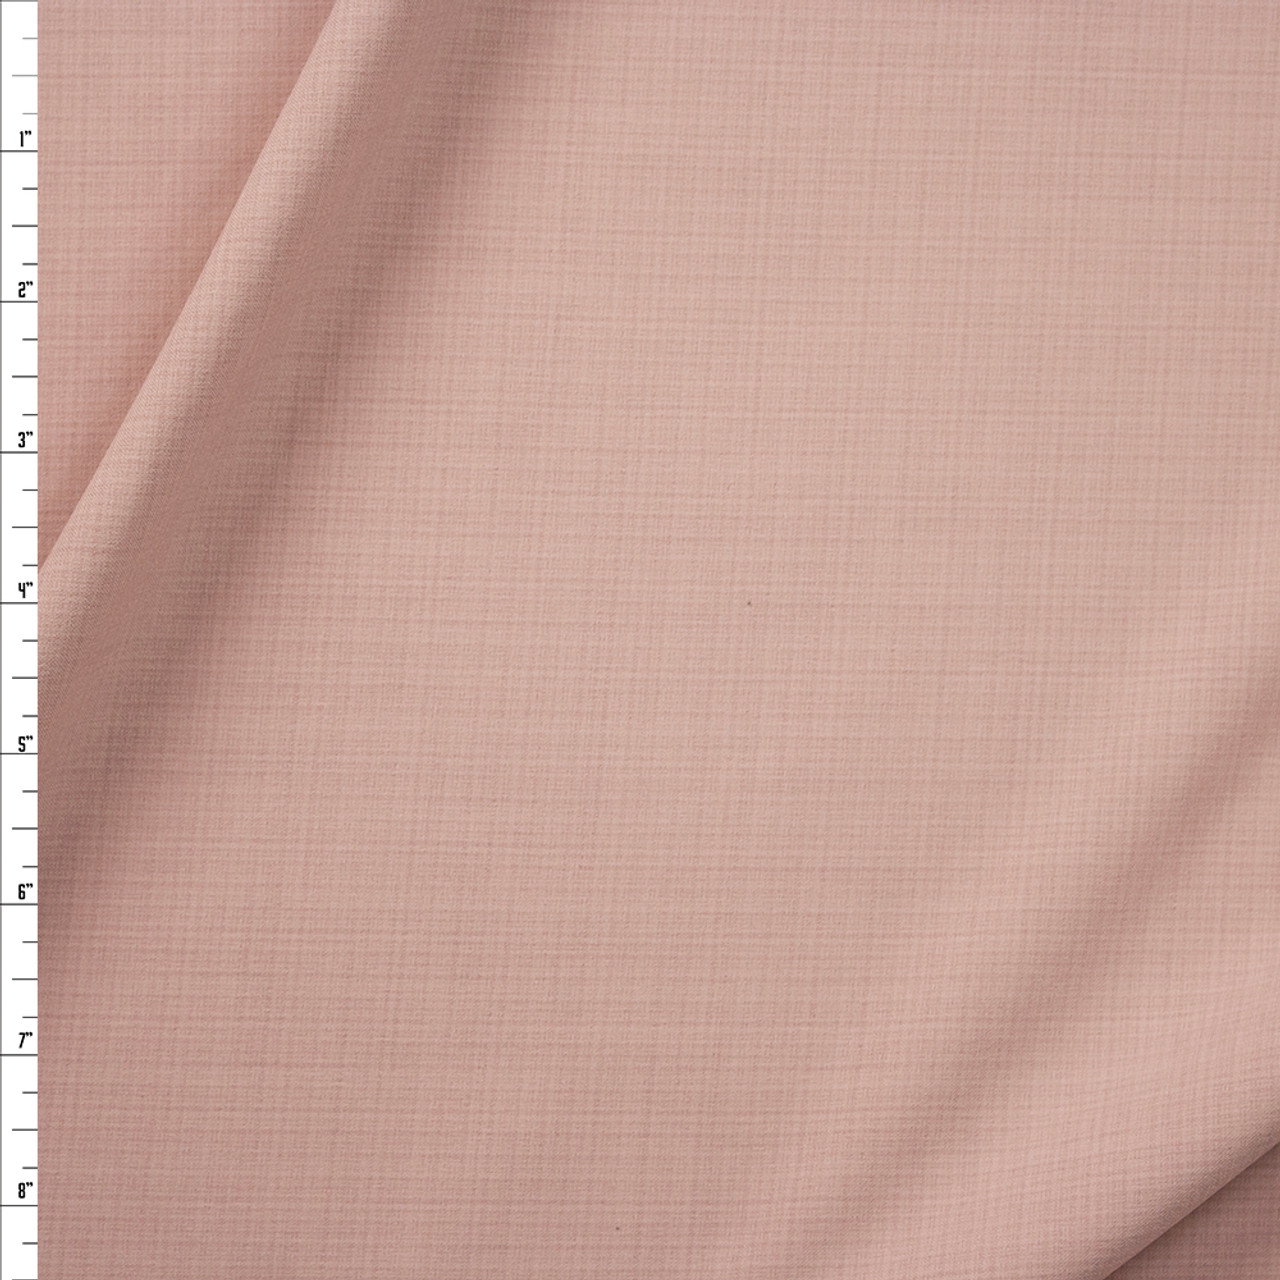 Fabric Review: Dusty Pink Scuba Crepe